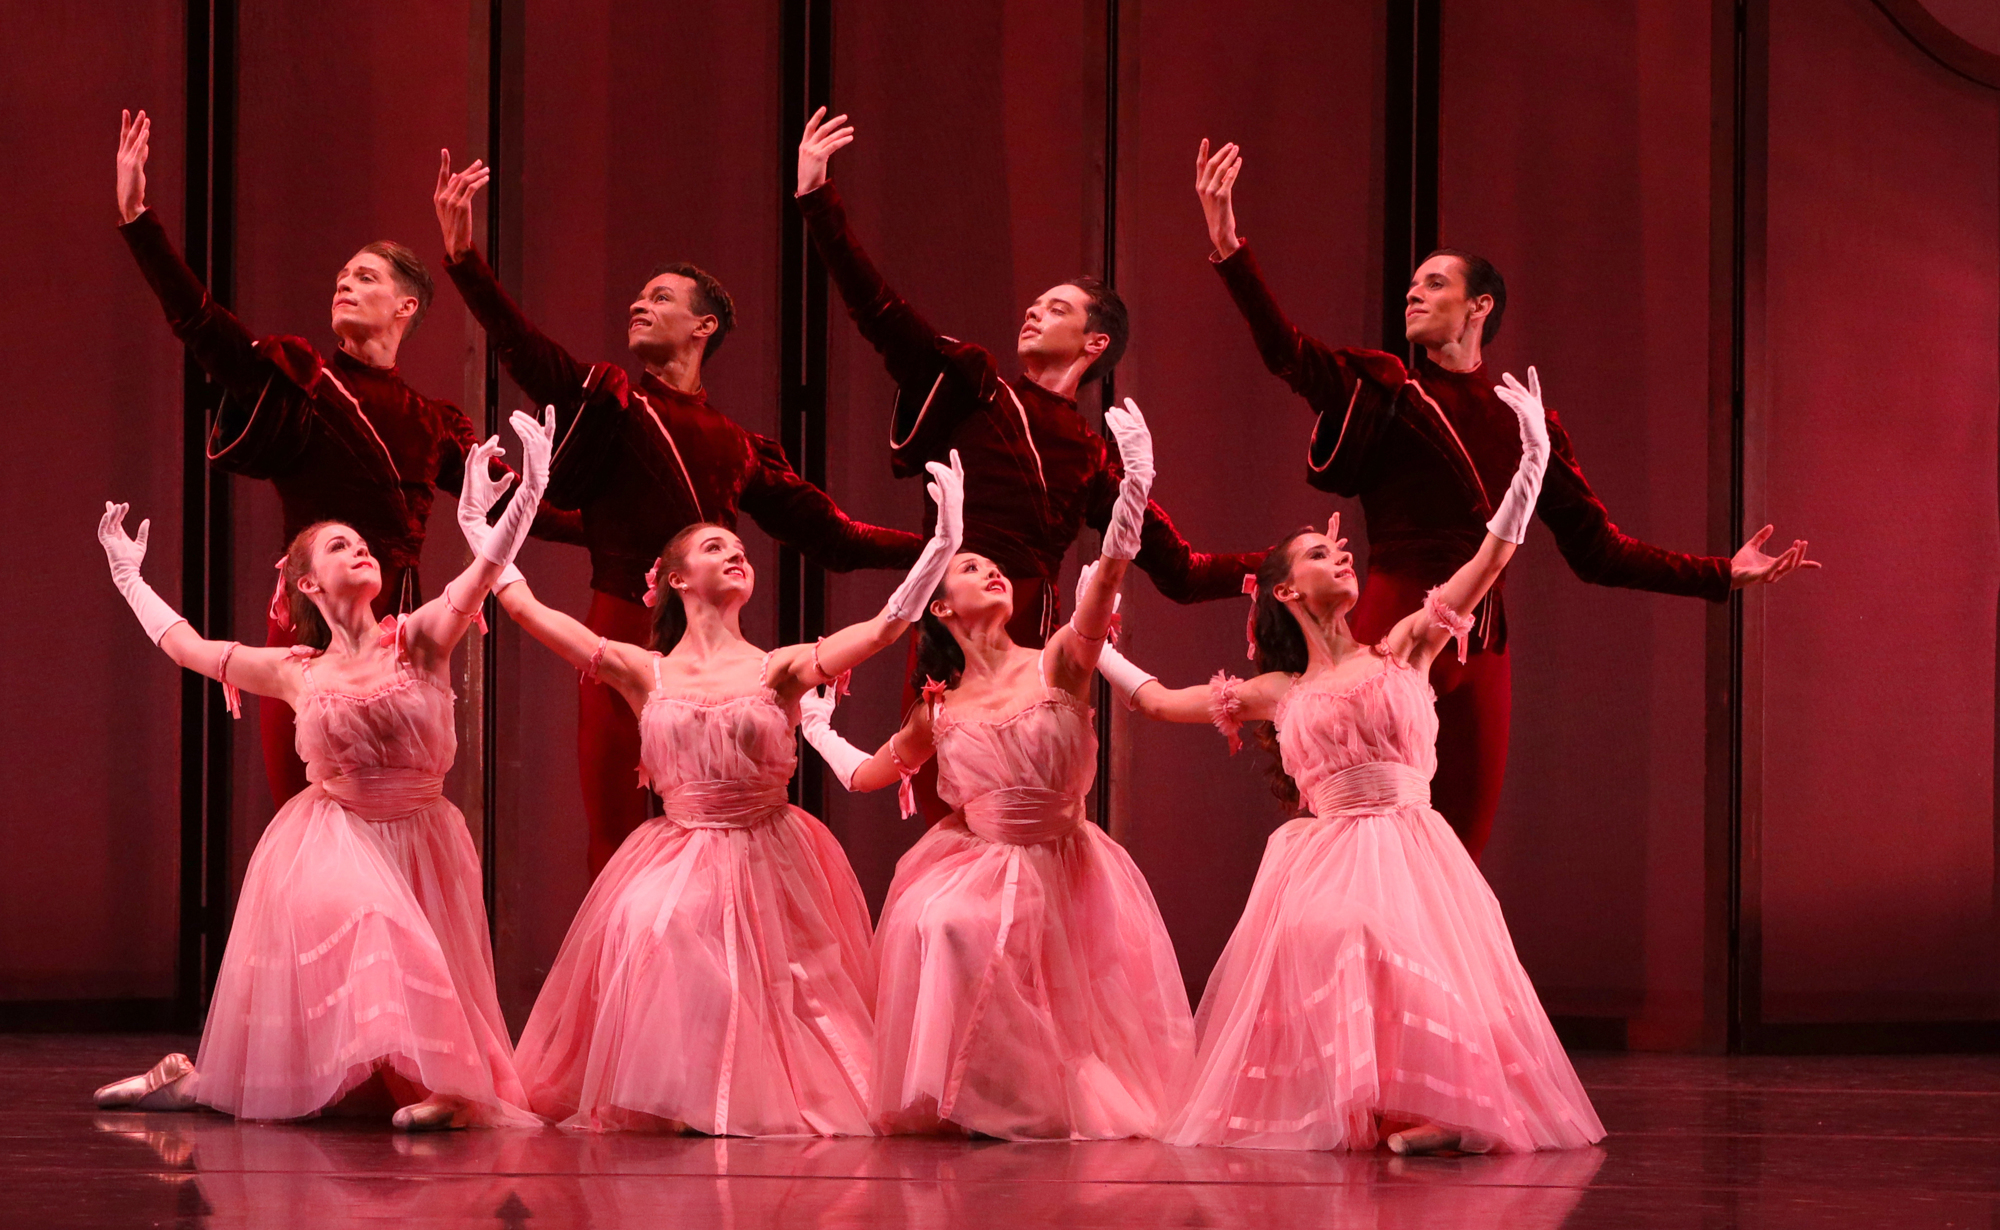 Love and Betrayal will bring the classic ballets of Ashton and de Valois to the Sarasota stage. (Courtesy photo)